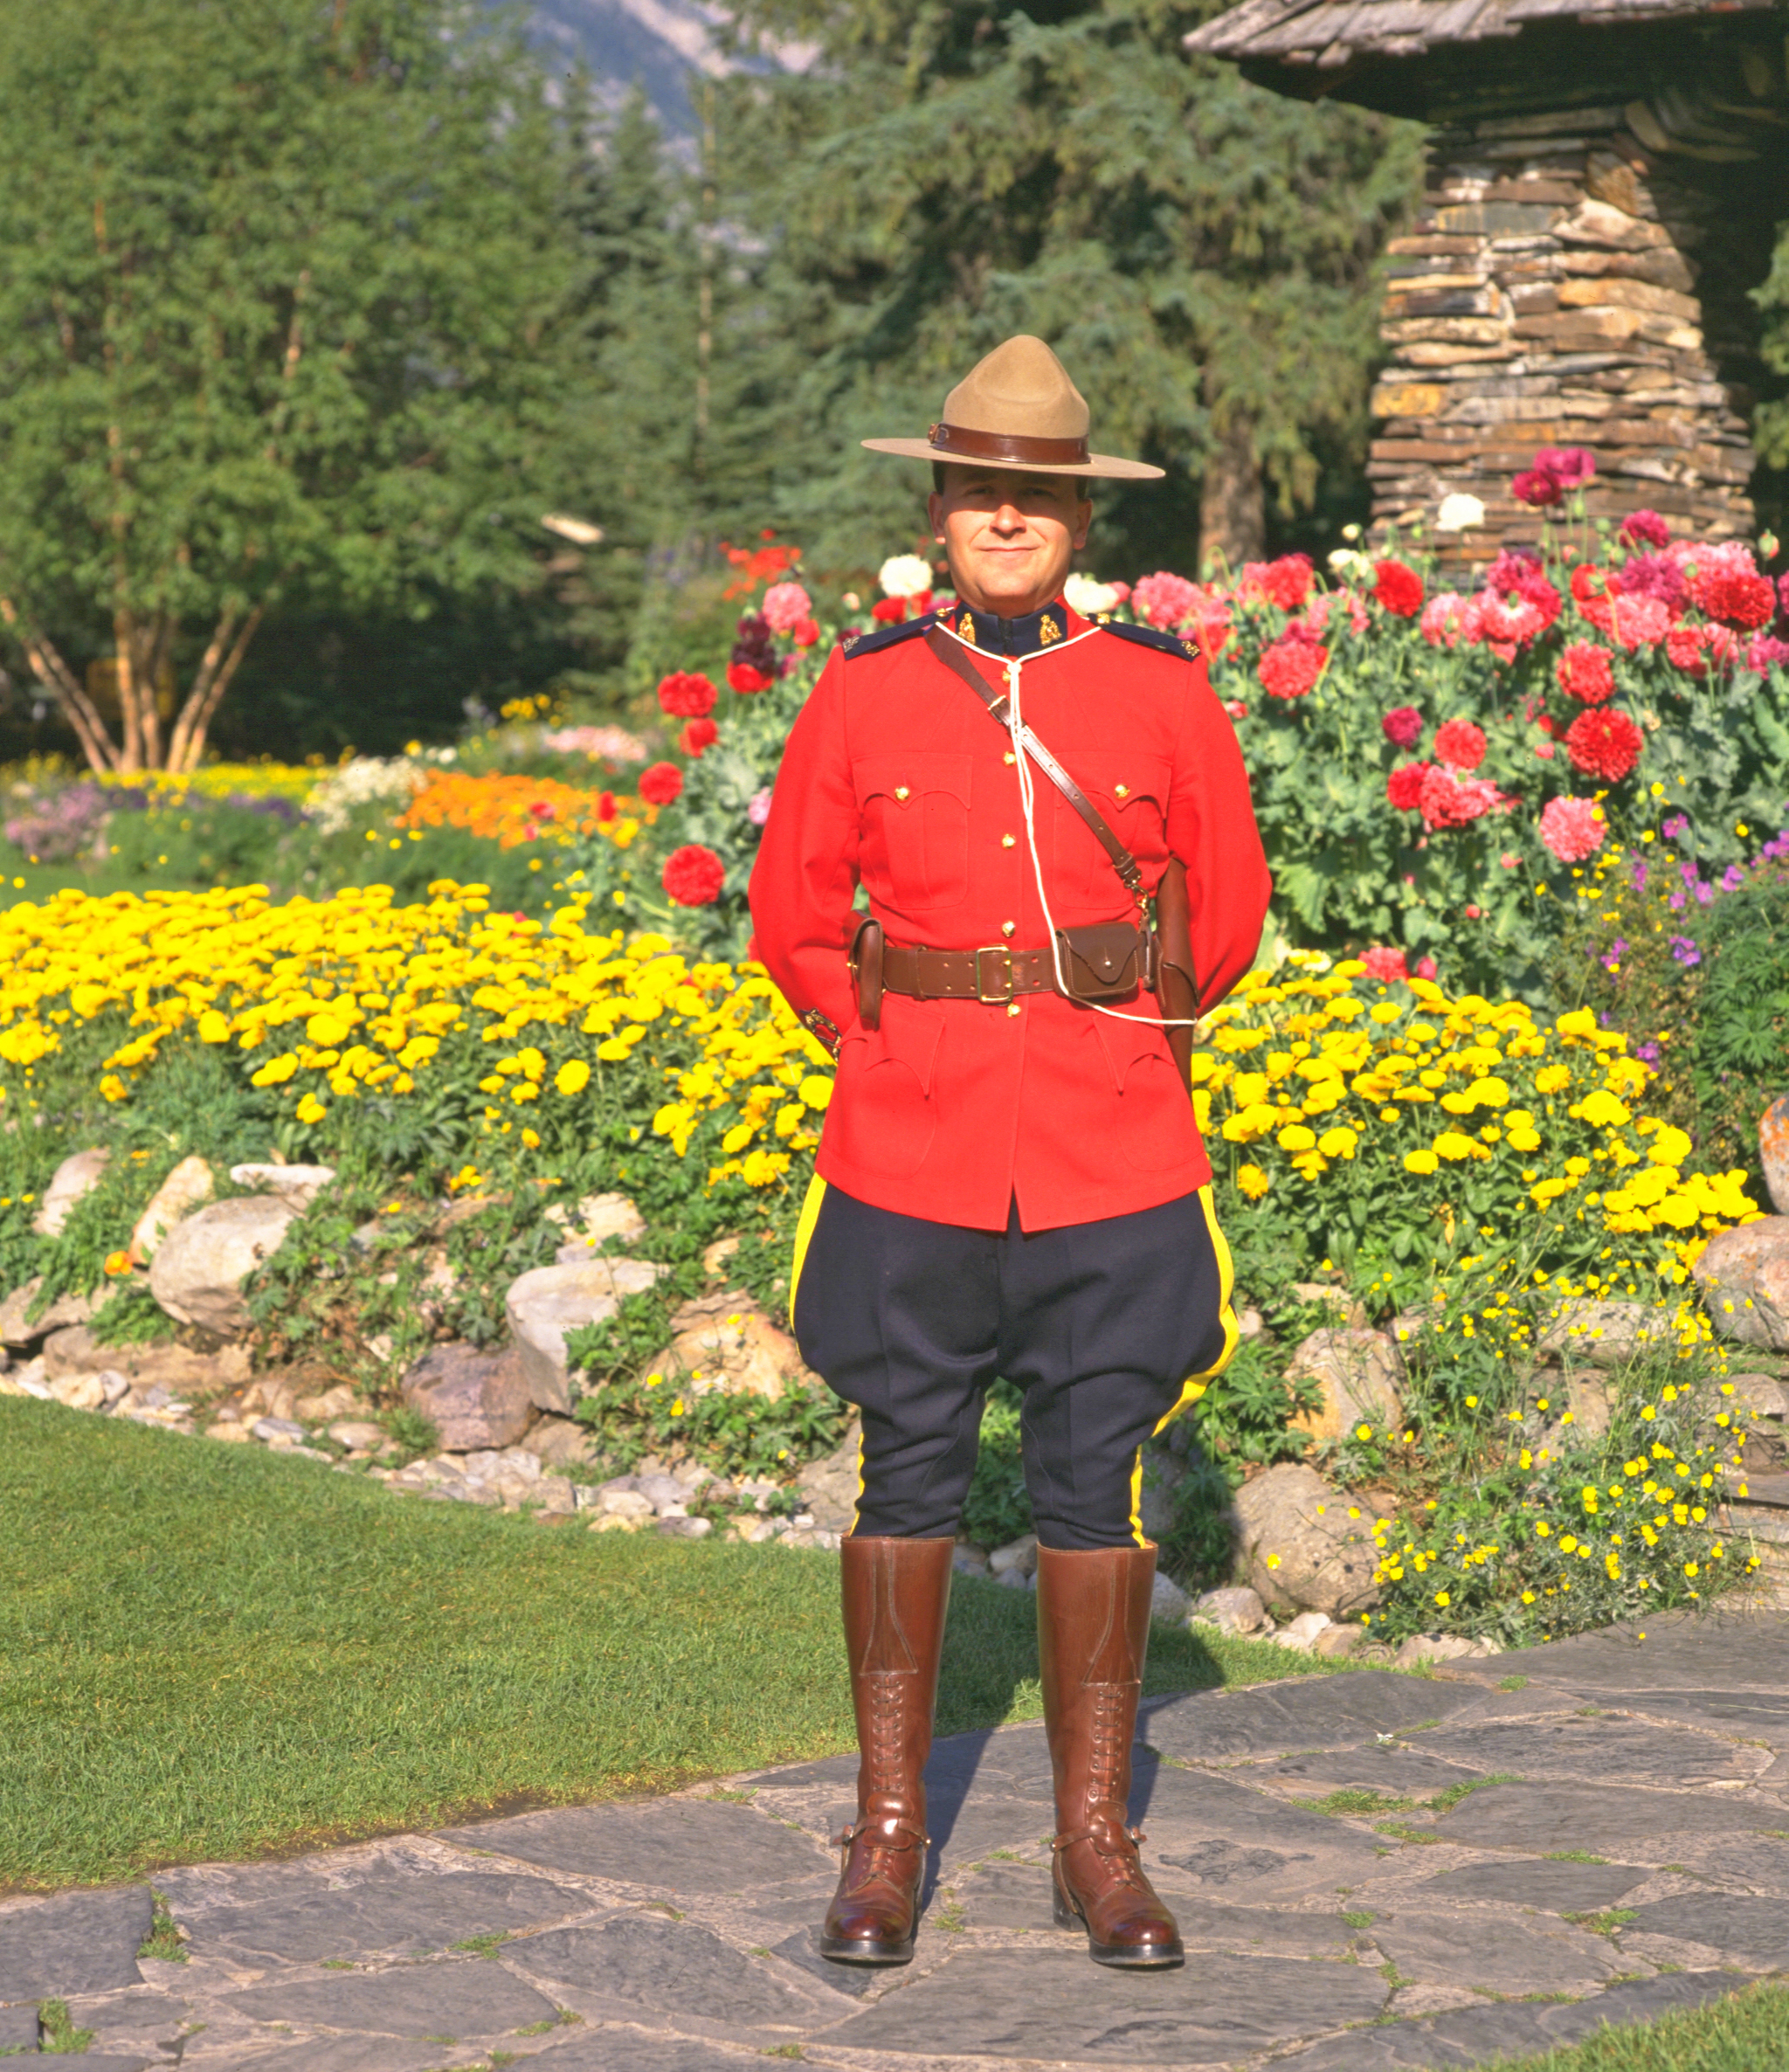 A Royal Canadian Mounted Police officer stands near the entrance to Cascade Gardens in downtown Banff. These lovely gardens are missed by many tourists, as they are tucked behind the Parks Canada administration office, near the south end of town. Photo courtesy Travel Alberta.